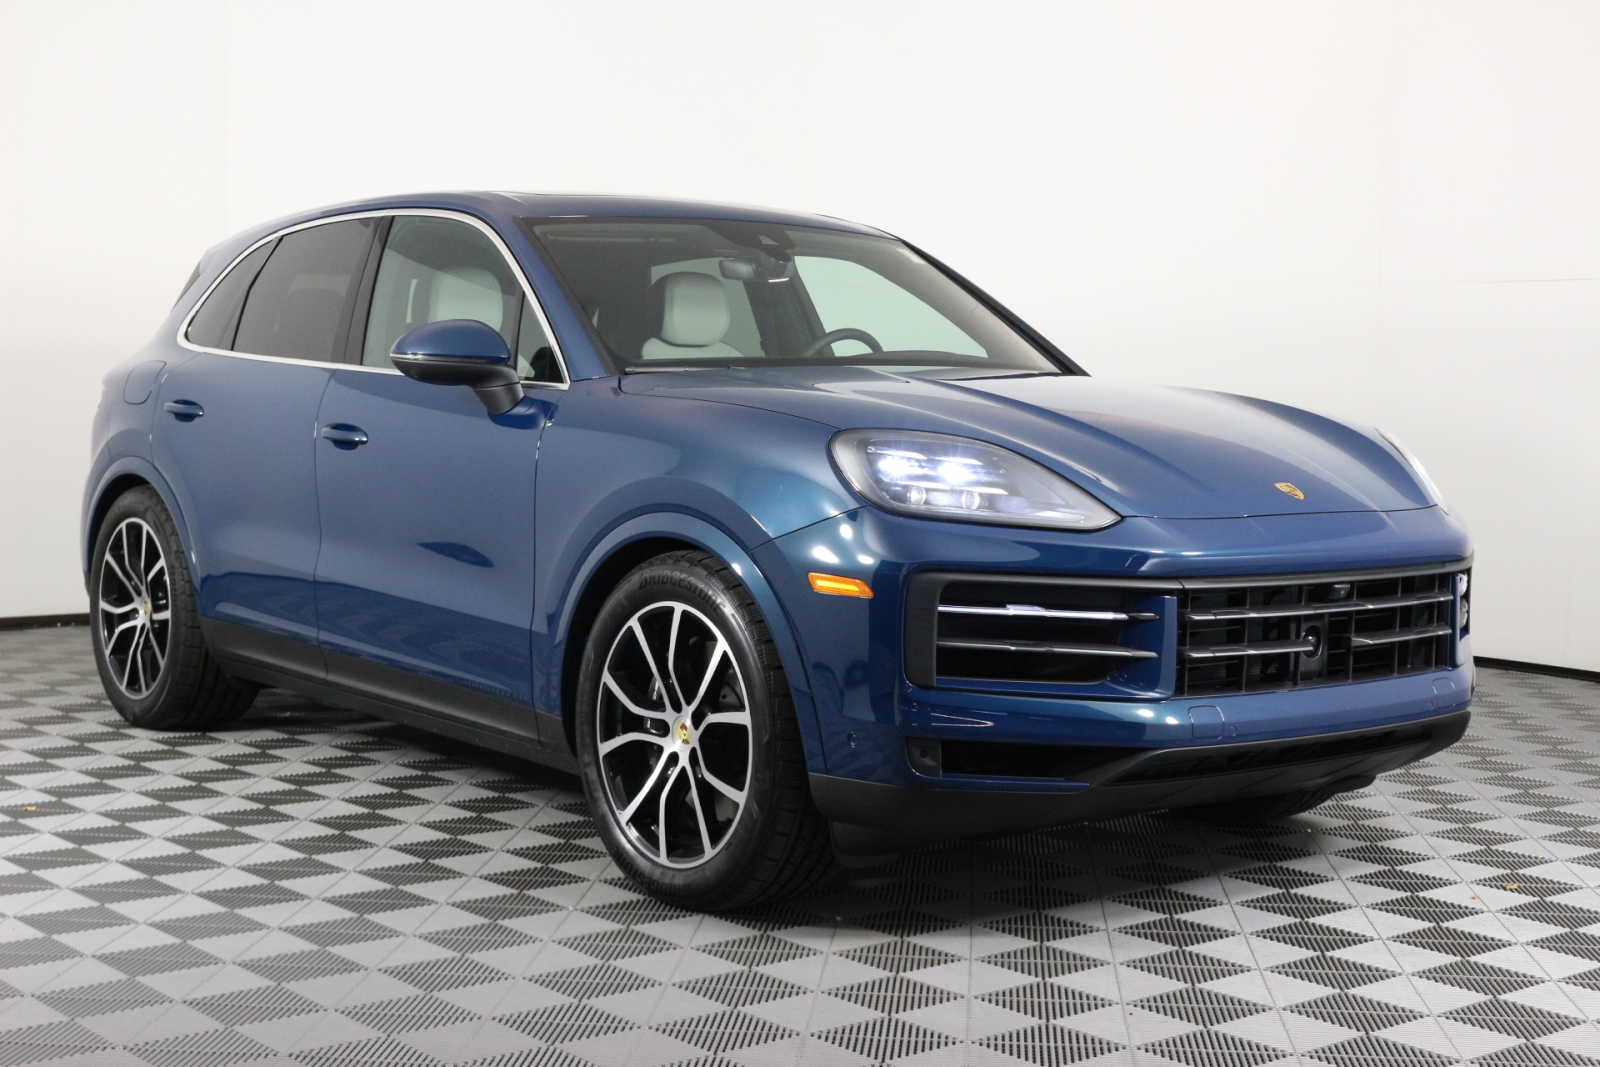 Best Porsche Cayenne Lease Deals and Special Sale Offers in Boston